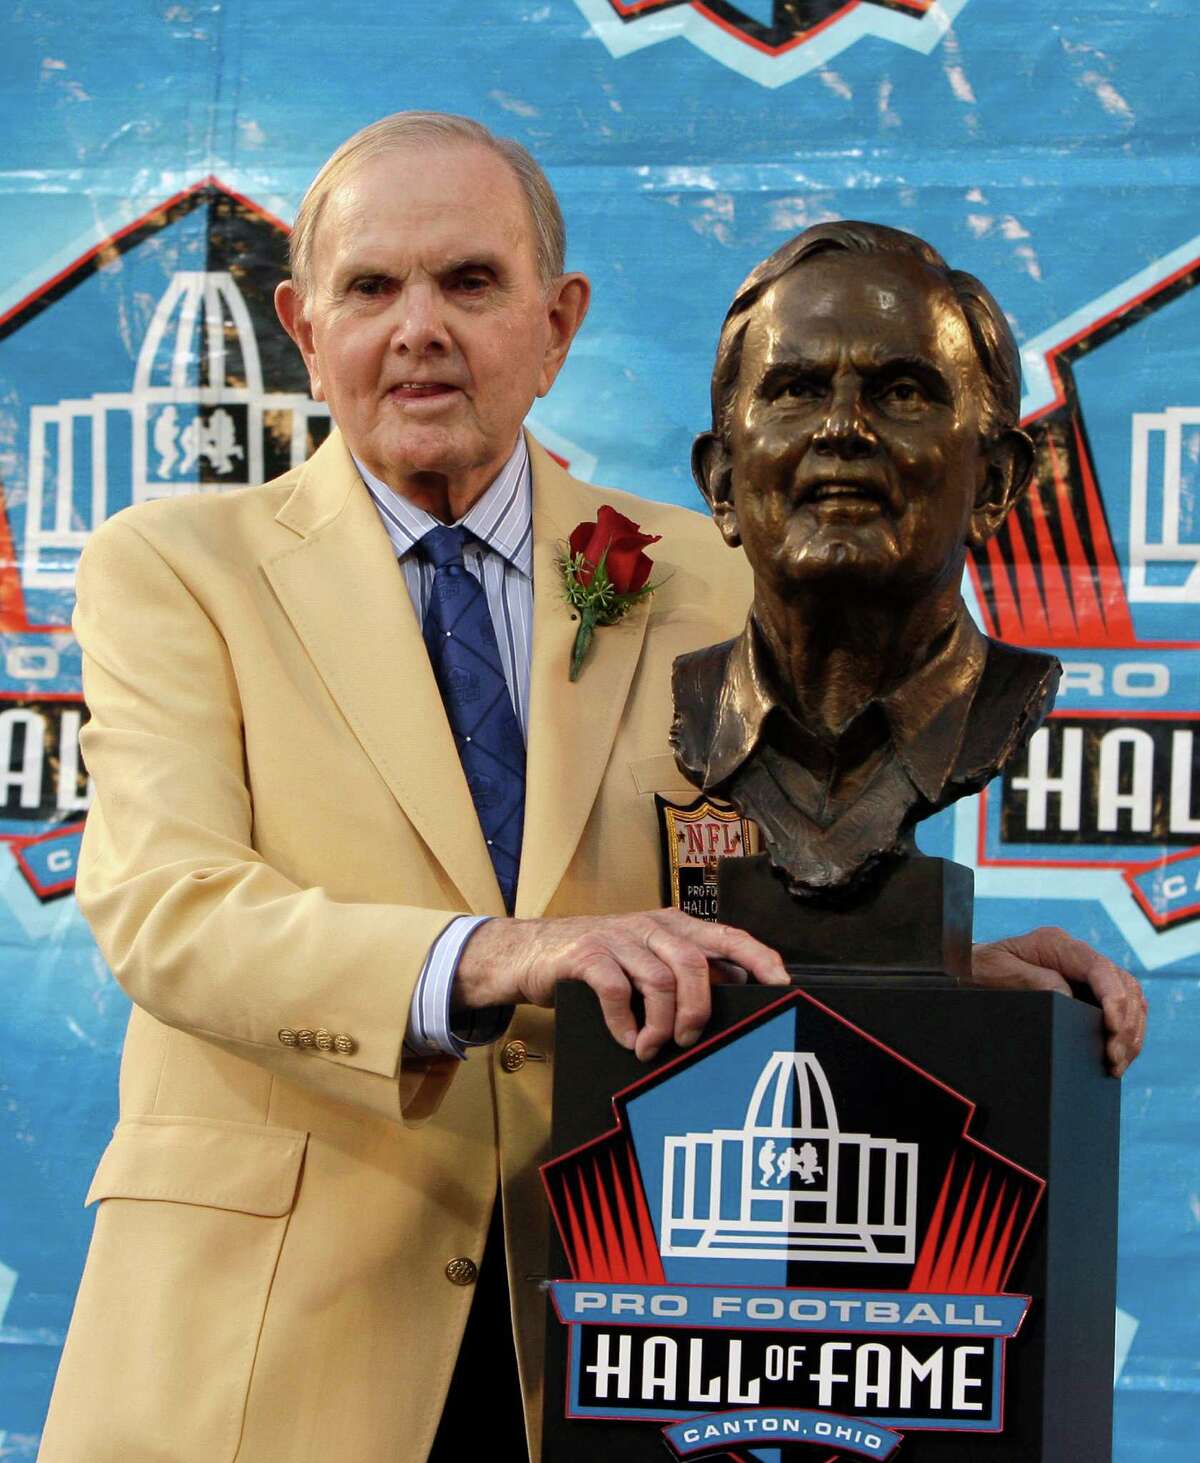 FILE - In this Aug. 8, 2009, file photo, founder and owner of the Buffalo Bills, Ralph Wilson Jr., stands with his bronze bust during the Pro Football Hall of Fame induction ceremony at the Pro Football Hall of Fame, Saturday, Aug. 8, 2009, in Canton, Ohio. Bills owner Wilson Jr. has died at his home in Grosse Pointe Shores, Mich., Tuesday, March 25, 2014. He was 95. Bills president Russ Brandon made the announcement at the NFL winter meetings in Orlando, Fla. Wilson Jr. was one of the original founders of the American Football League and owned the Bills for the last 54 years. (AP Photo/Tony Dejak, File)